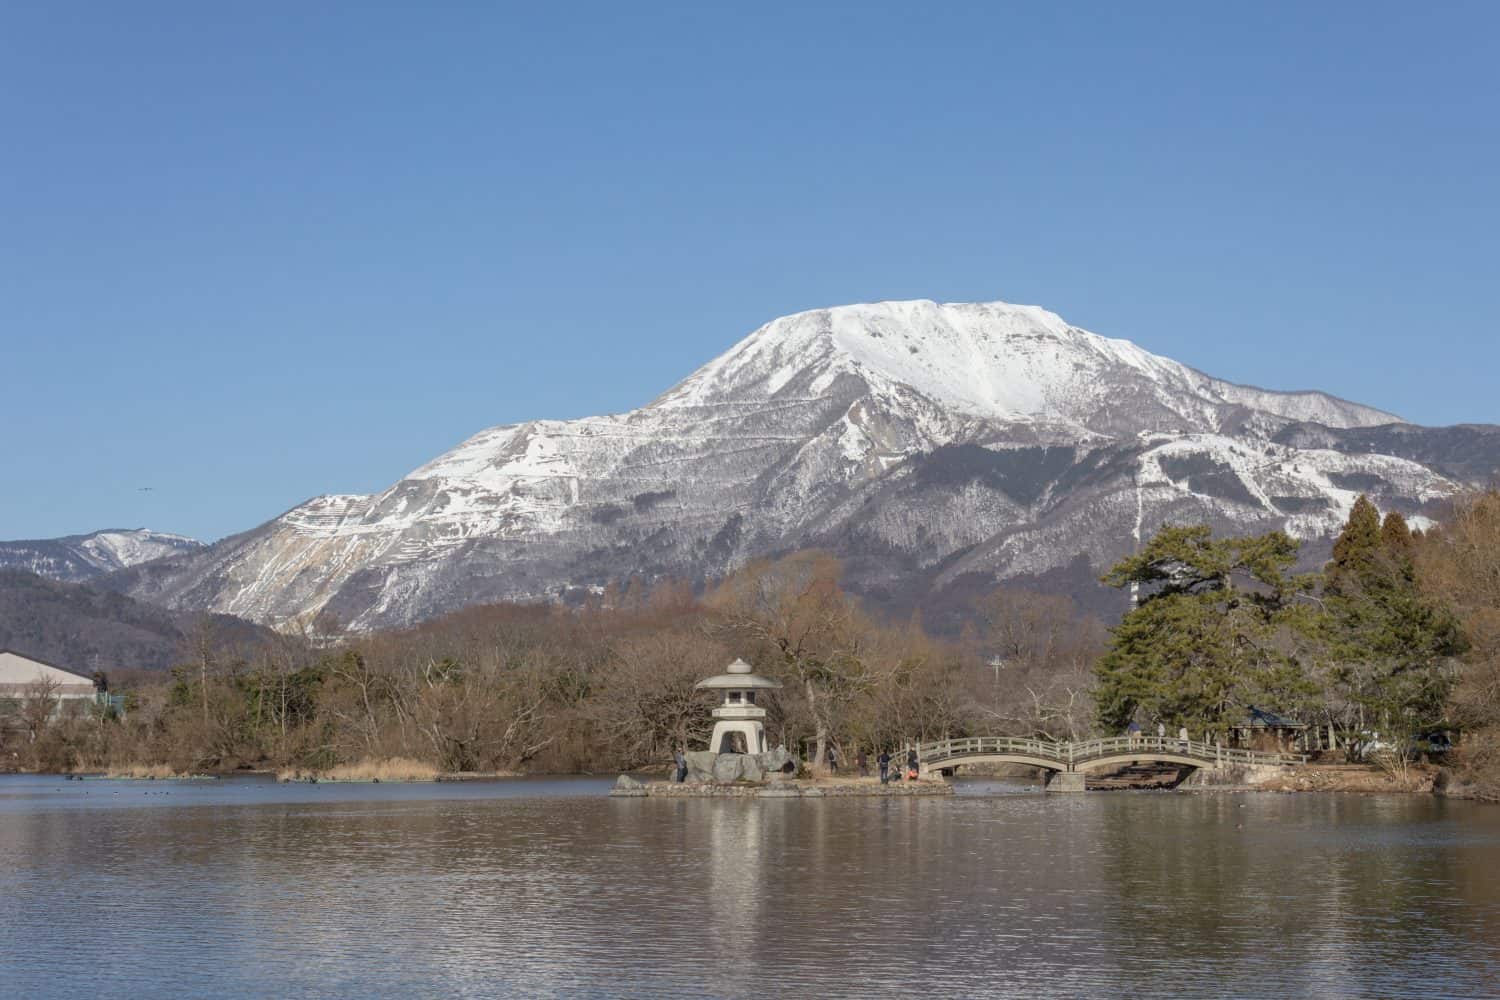 Winter Mount Ibuki seen from the shore of Pond Mishima